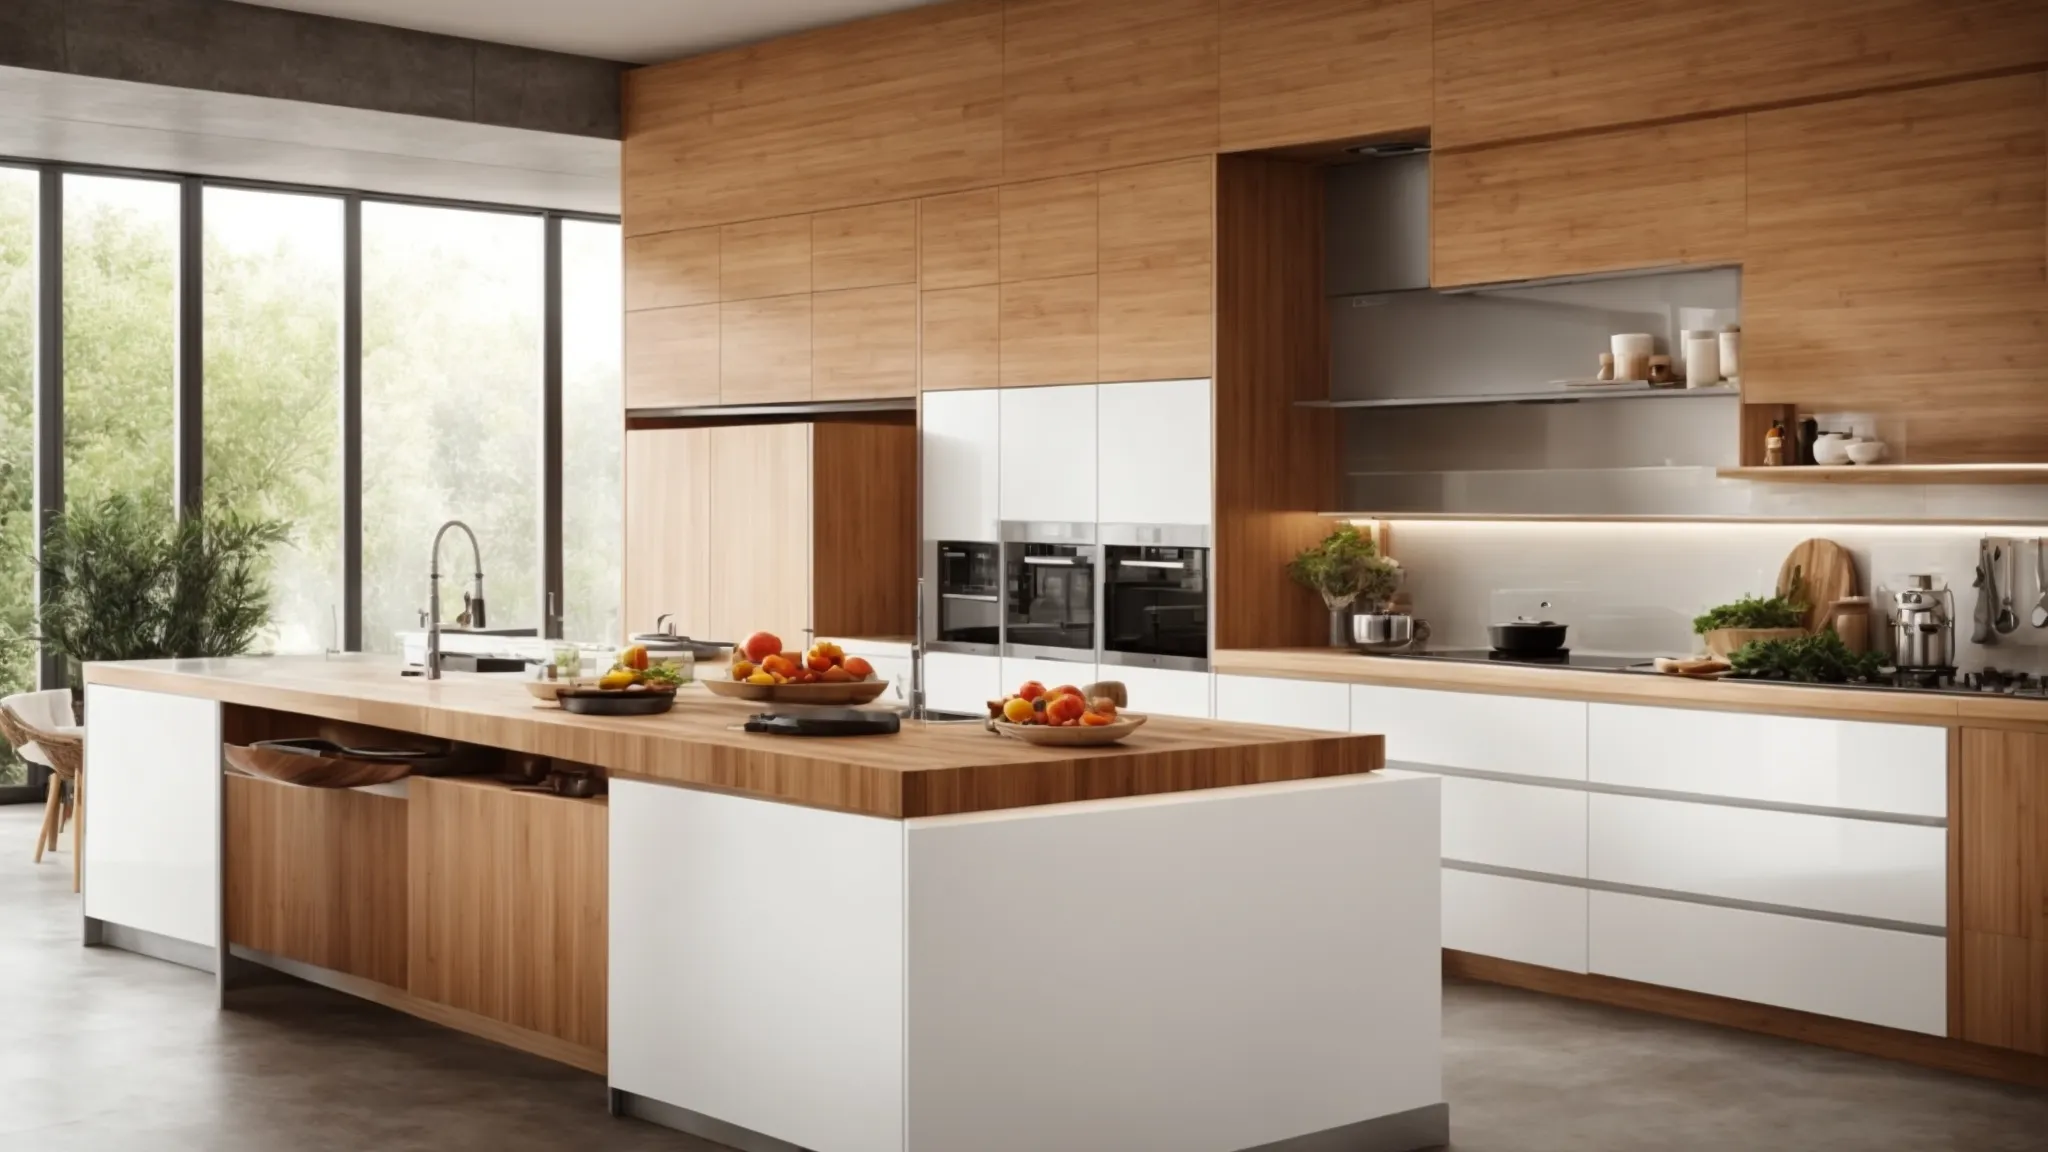 a modern kitchen with energy-efficient appliances and bamboo countertops.